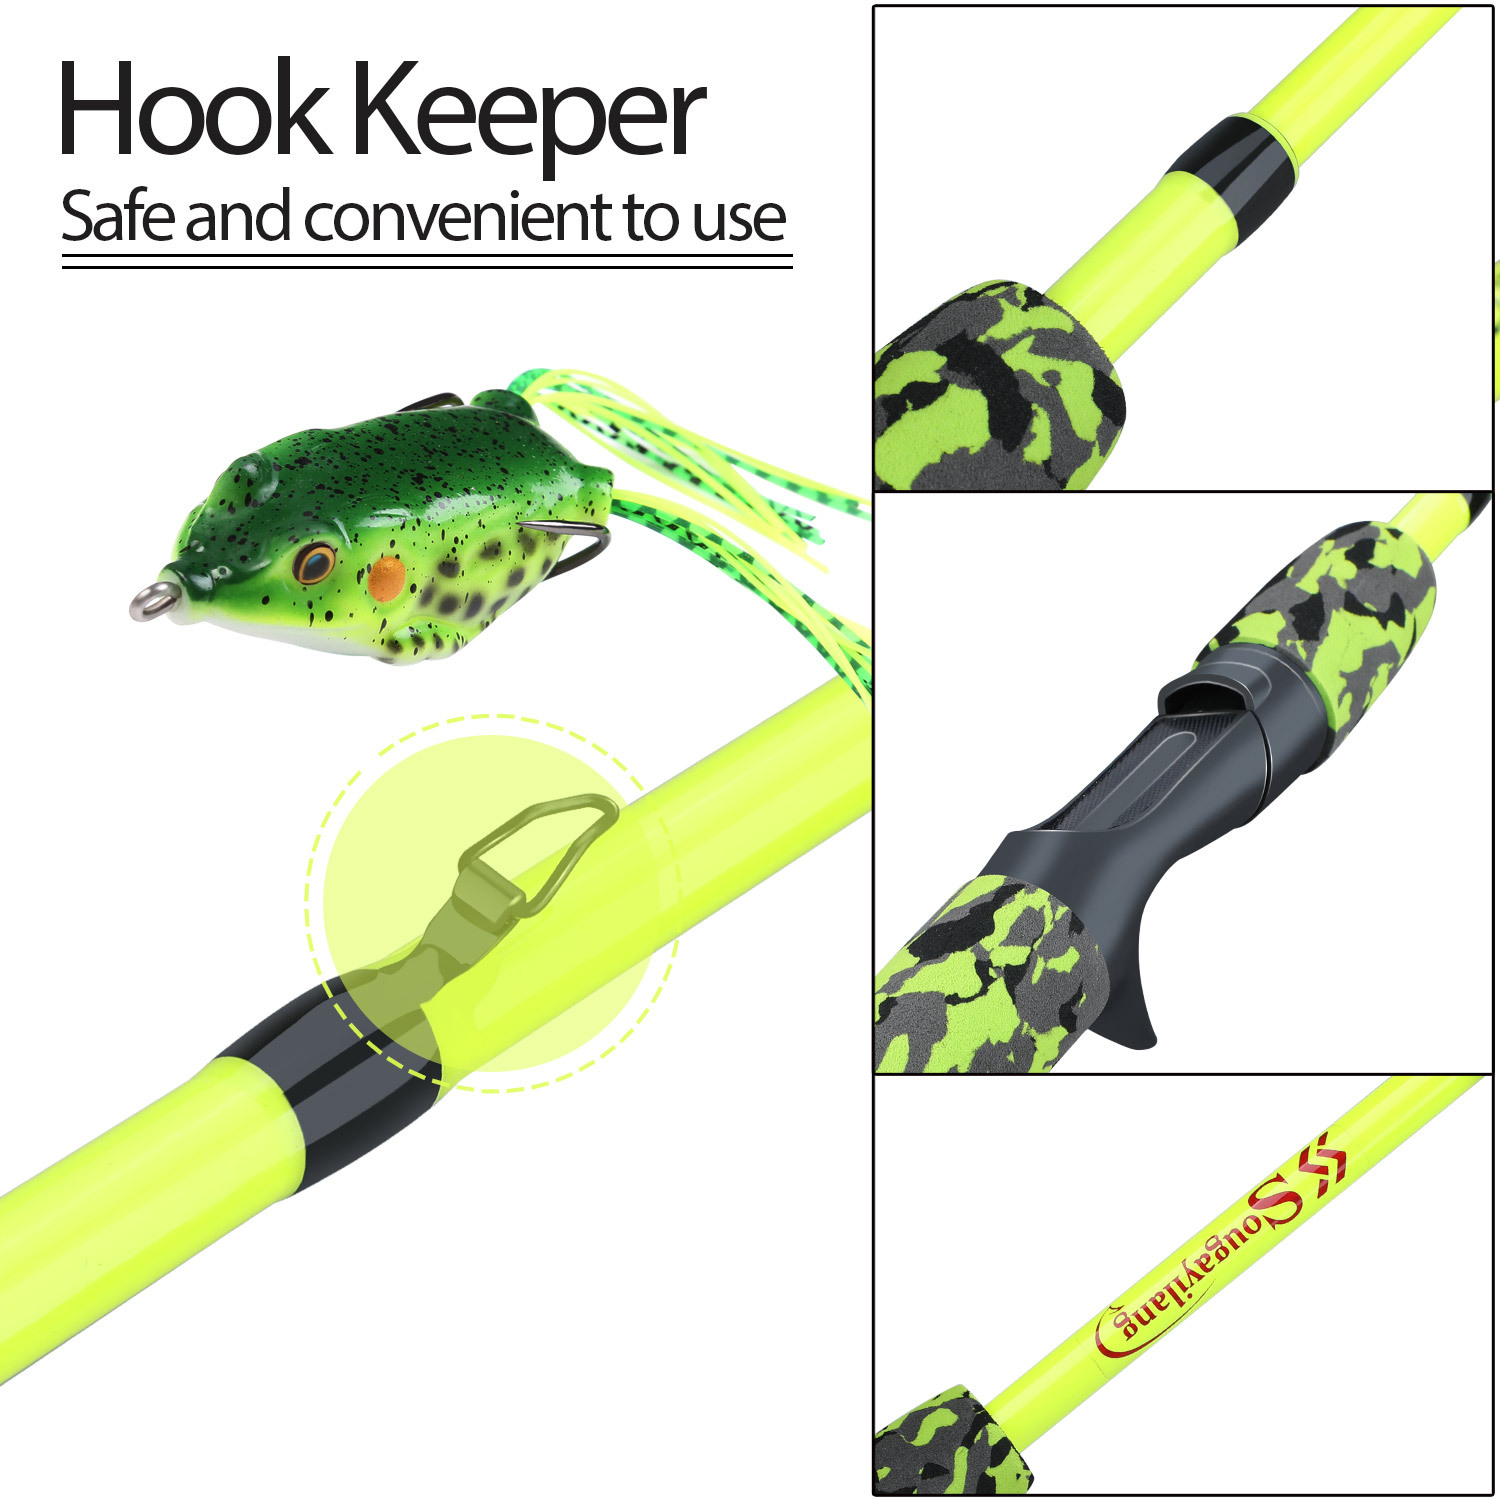  Portable Fishing Rod Telescopic Fishing Rod and Reel Combo  Lightweight Fishing Pole Surf Rod with Comfortable Handle Outdoor Fly Fishing  Rod Easy to Carry : Sports & Outdoors